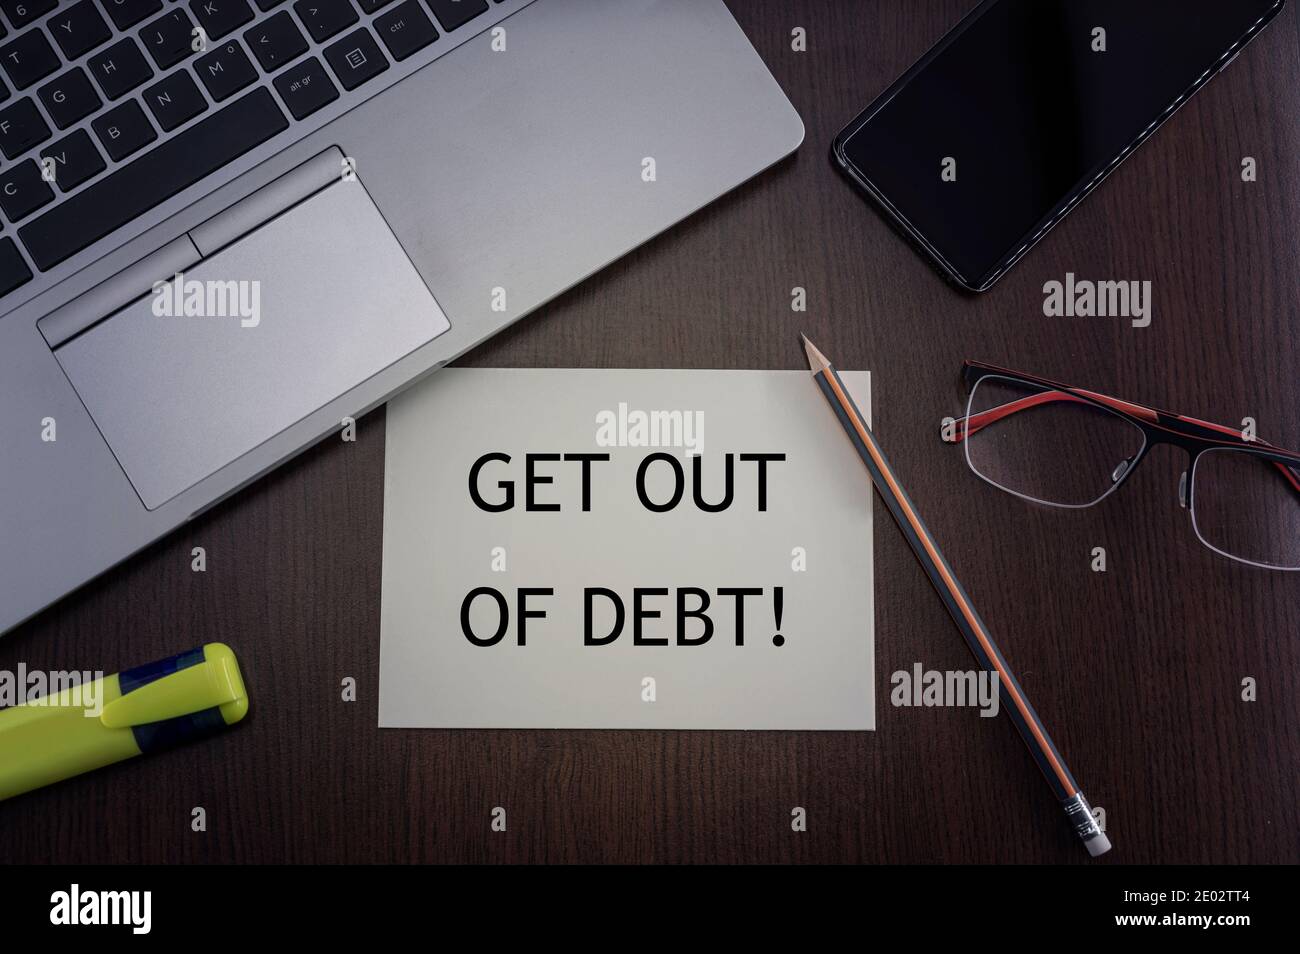 Get out of debt card. Top view of office table desktop background with laptop, phone, glasses and pencil with card with inscription get out of debt. Stock Photo